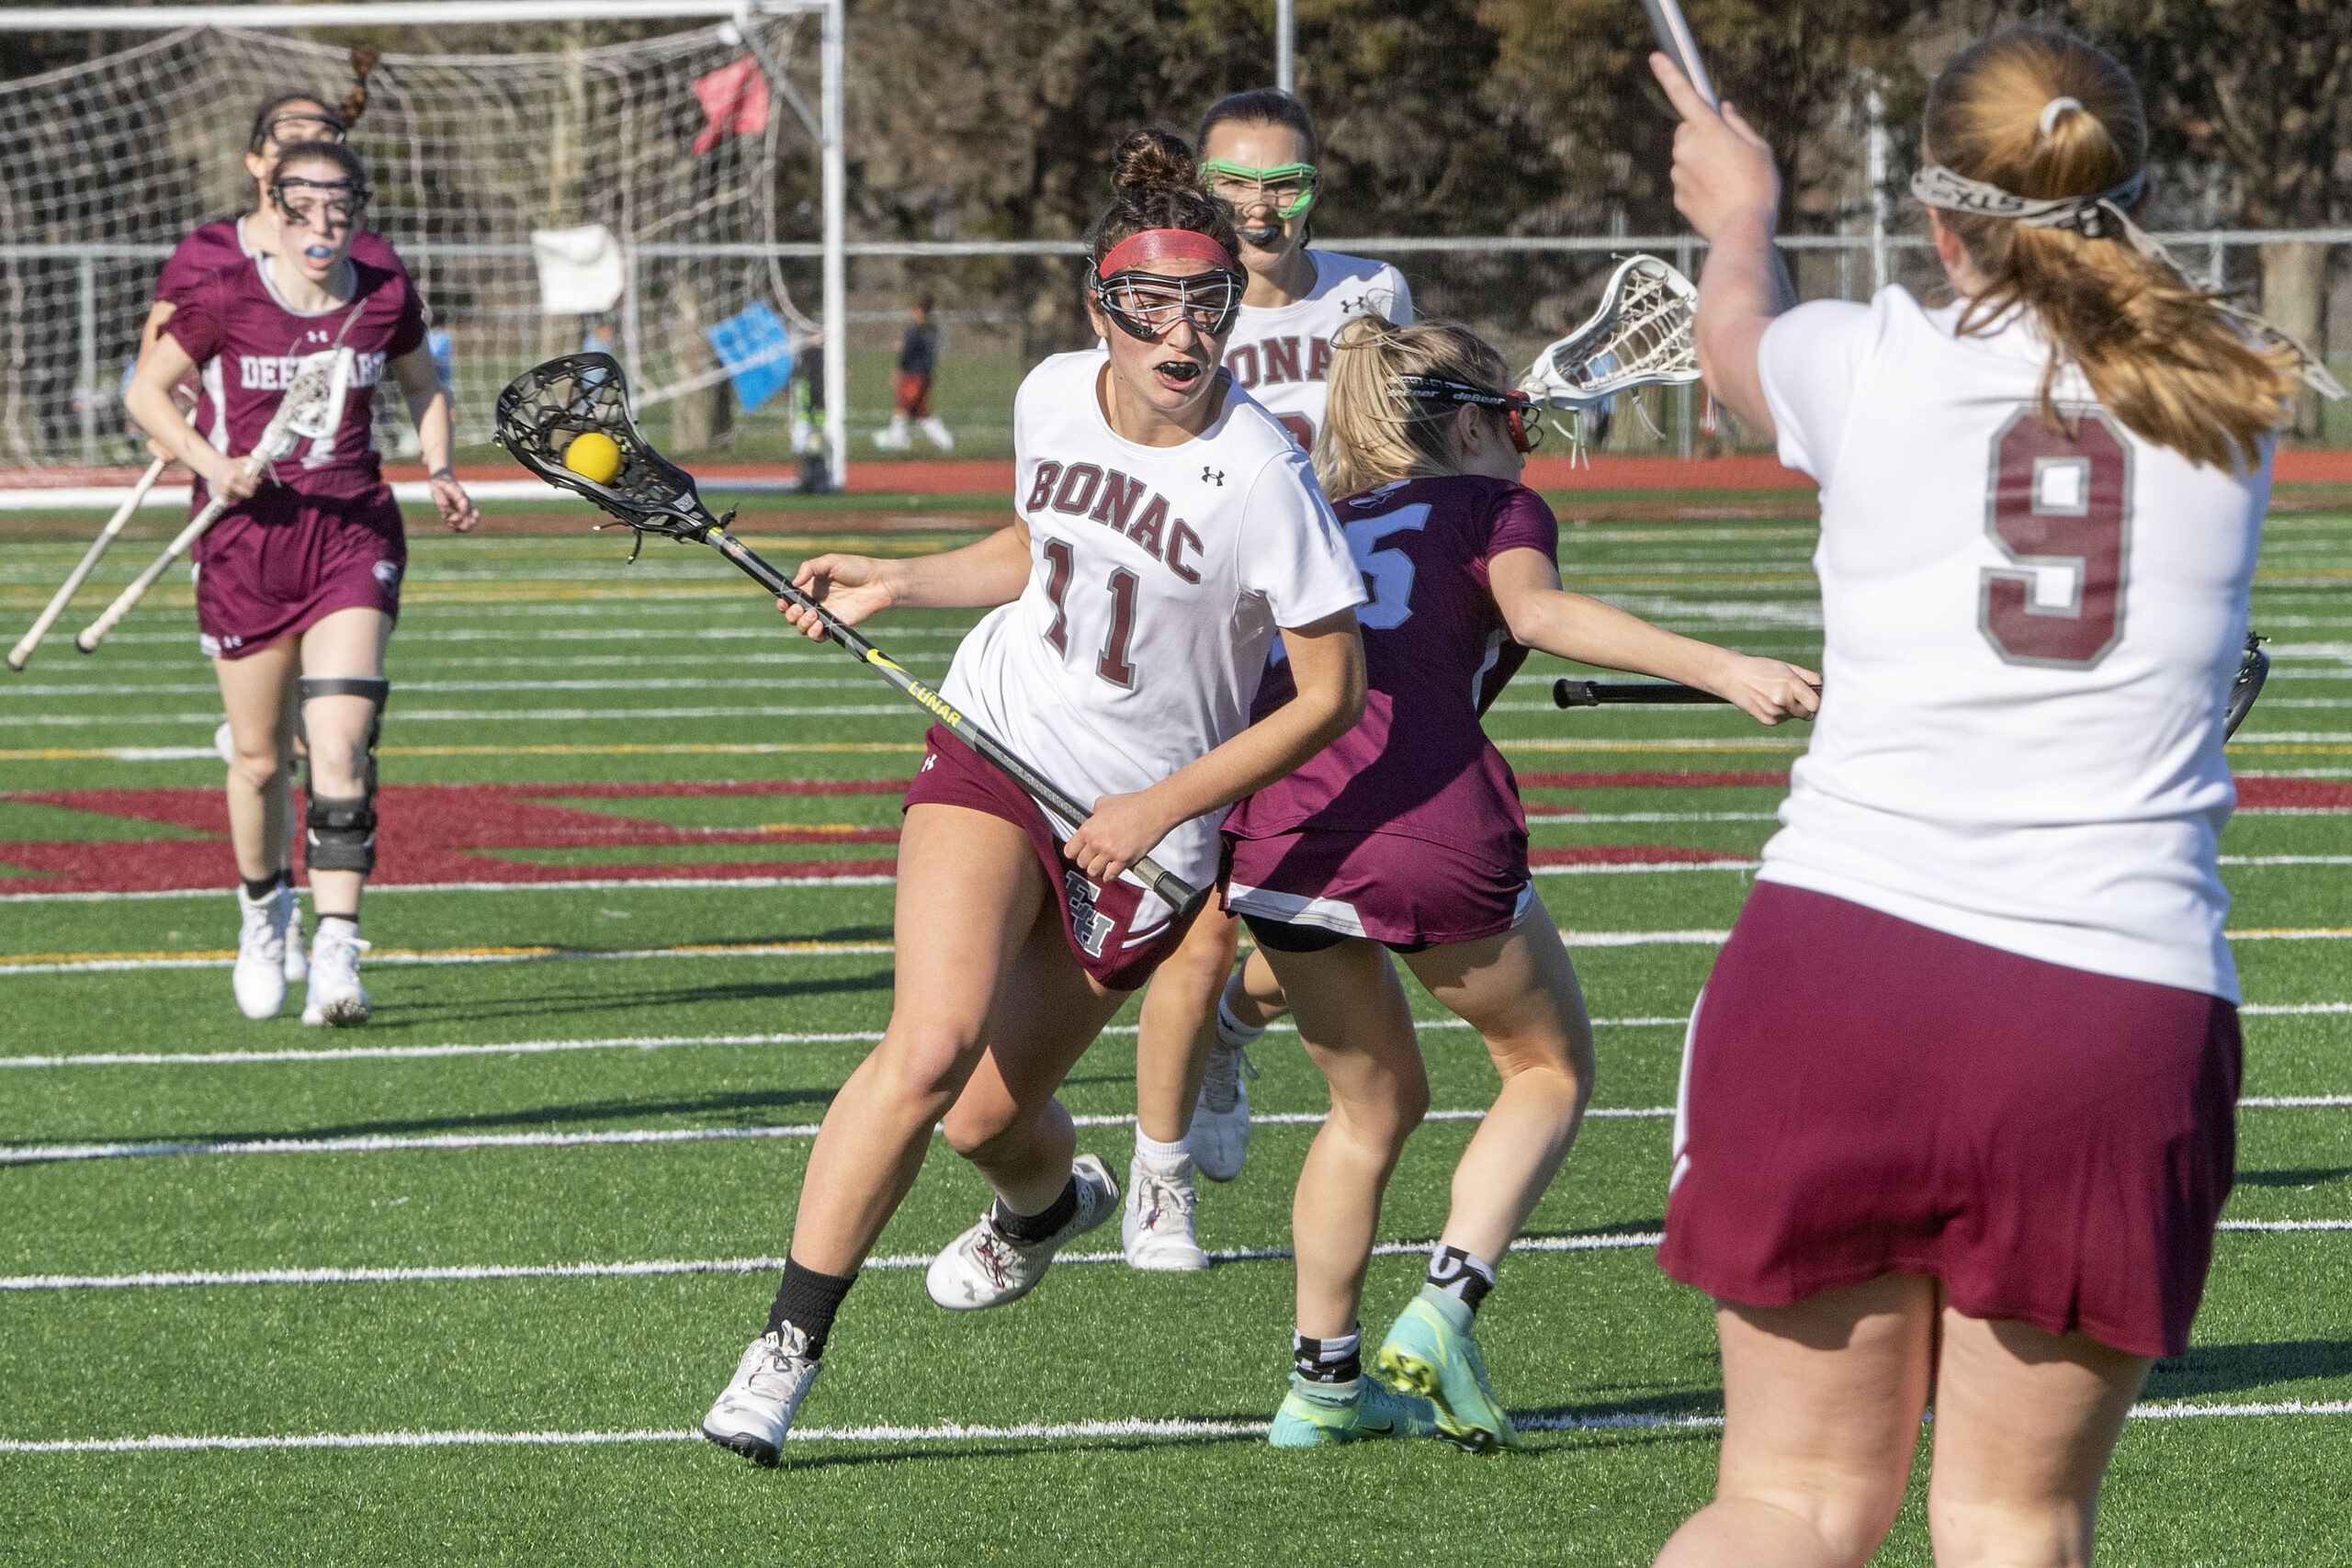 East Hampton's Ella Bistrian muscles past a defender as she moves the ball.   MICHAEL HELLER